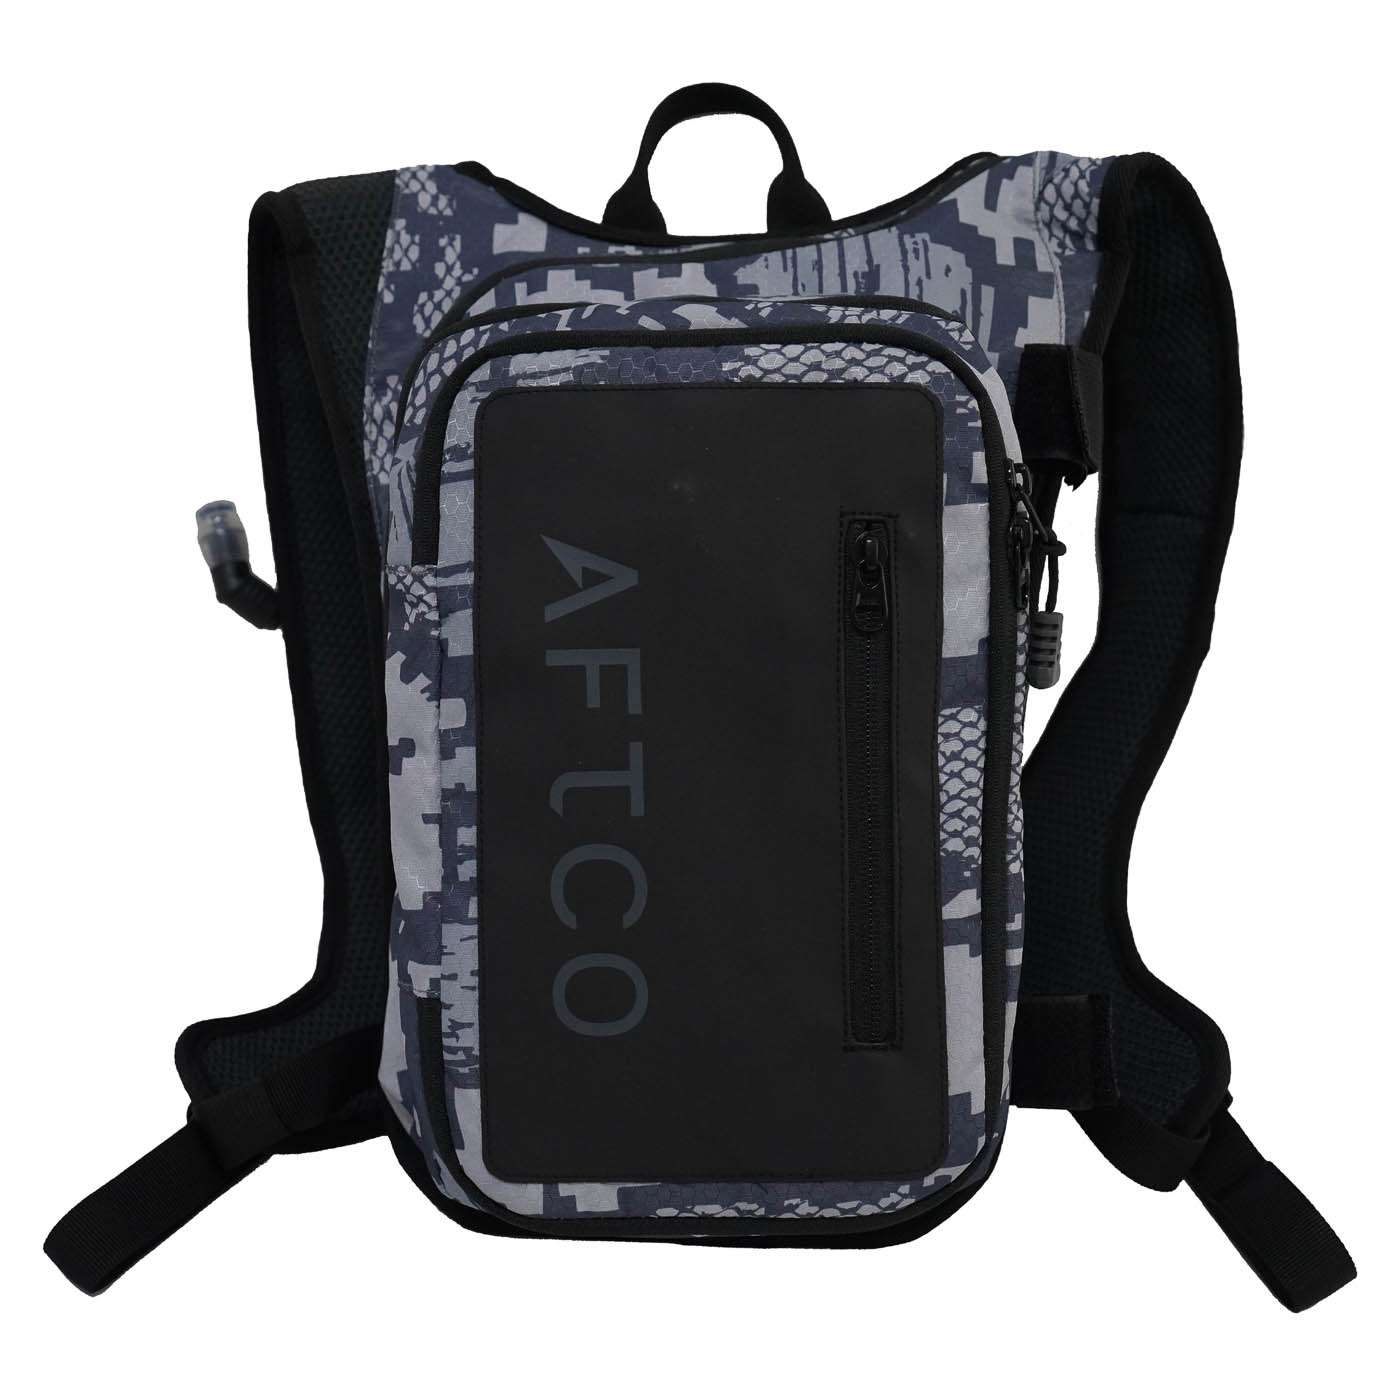 <p><strong>AFTCO Urban Angler Backpack</strong></p><p>An angling backpack for small waters that wonât fatigue but still has all the storage needed. The AFTCO Urban Angler Backpack can hold a 3600- and a 3500-size utility box, while still having room for a 1.5-liter hydration bladder. Numerous storage options ensure nothing gets left behind. The list of features is long: Plier holders, rod holders, 5 bait envelopes and a pocket for phones, wallets, keys or fishing licenses. Lumbar support and elevated back rest keeps this small backpack comfortable enough to wear all day. $99. <a href=